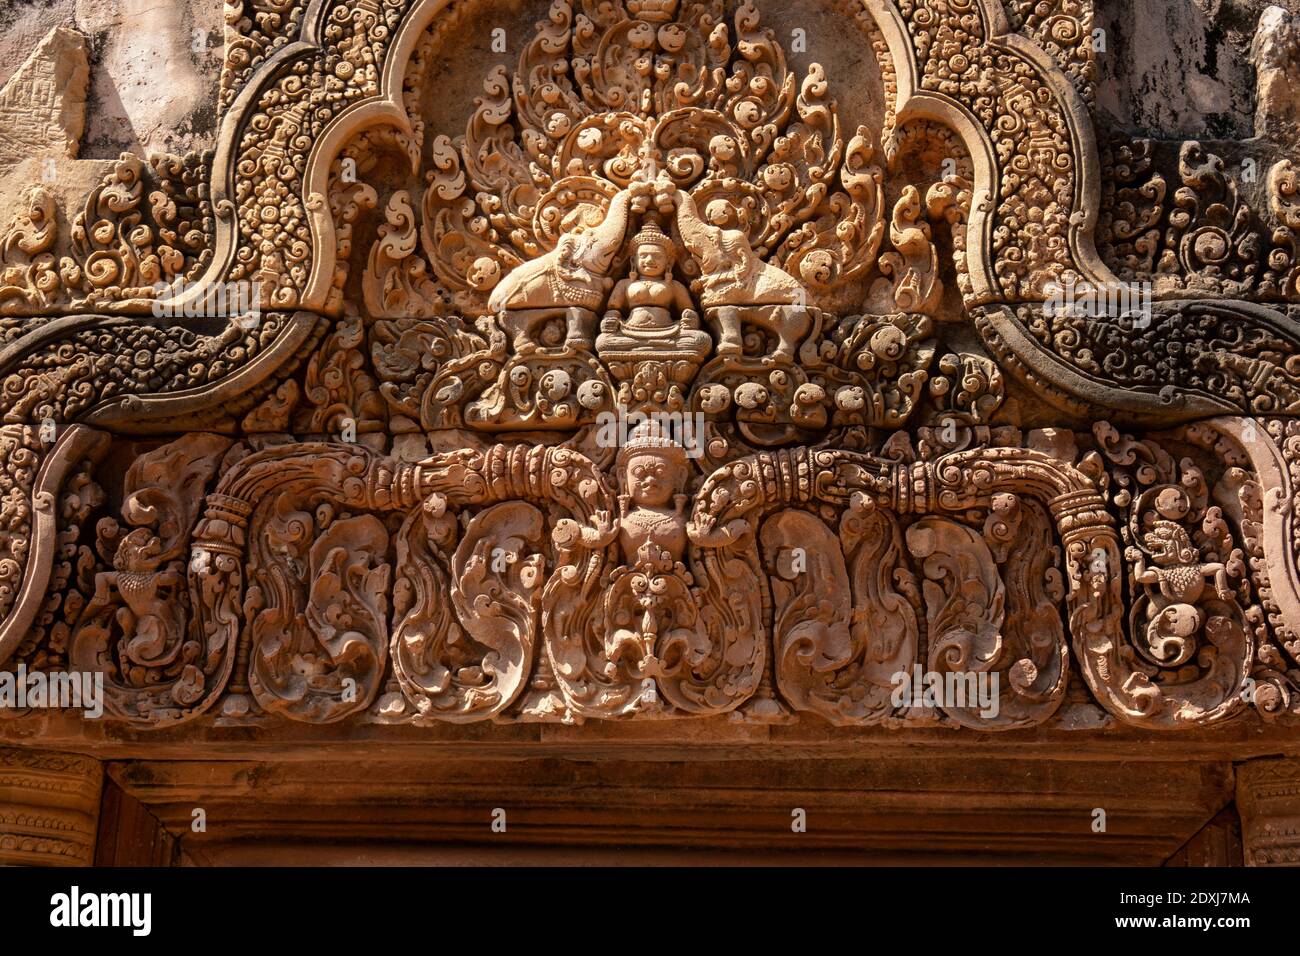 Bas-relief on the walls of Banteay Srei Stock Photo